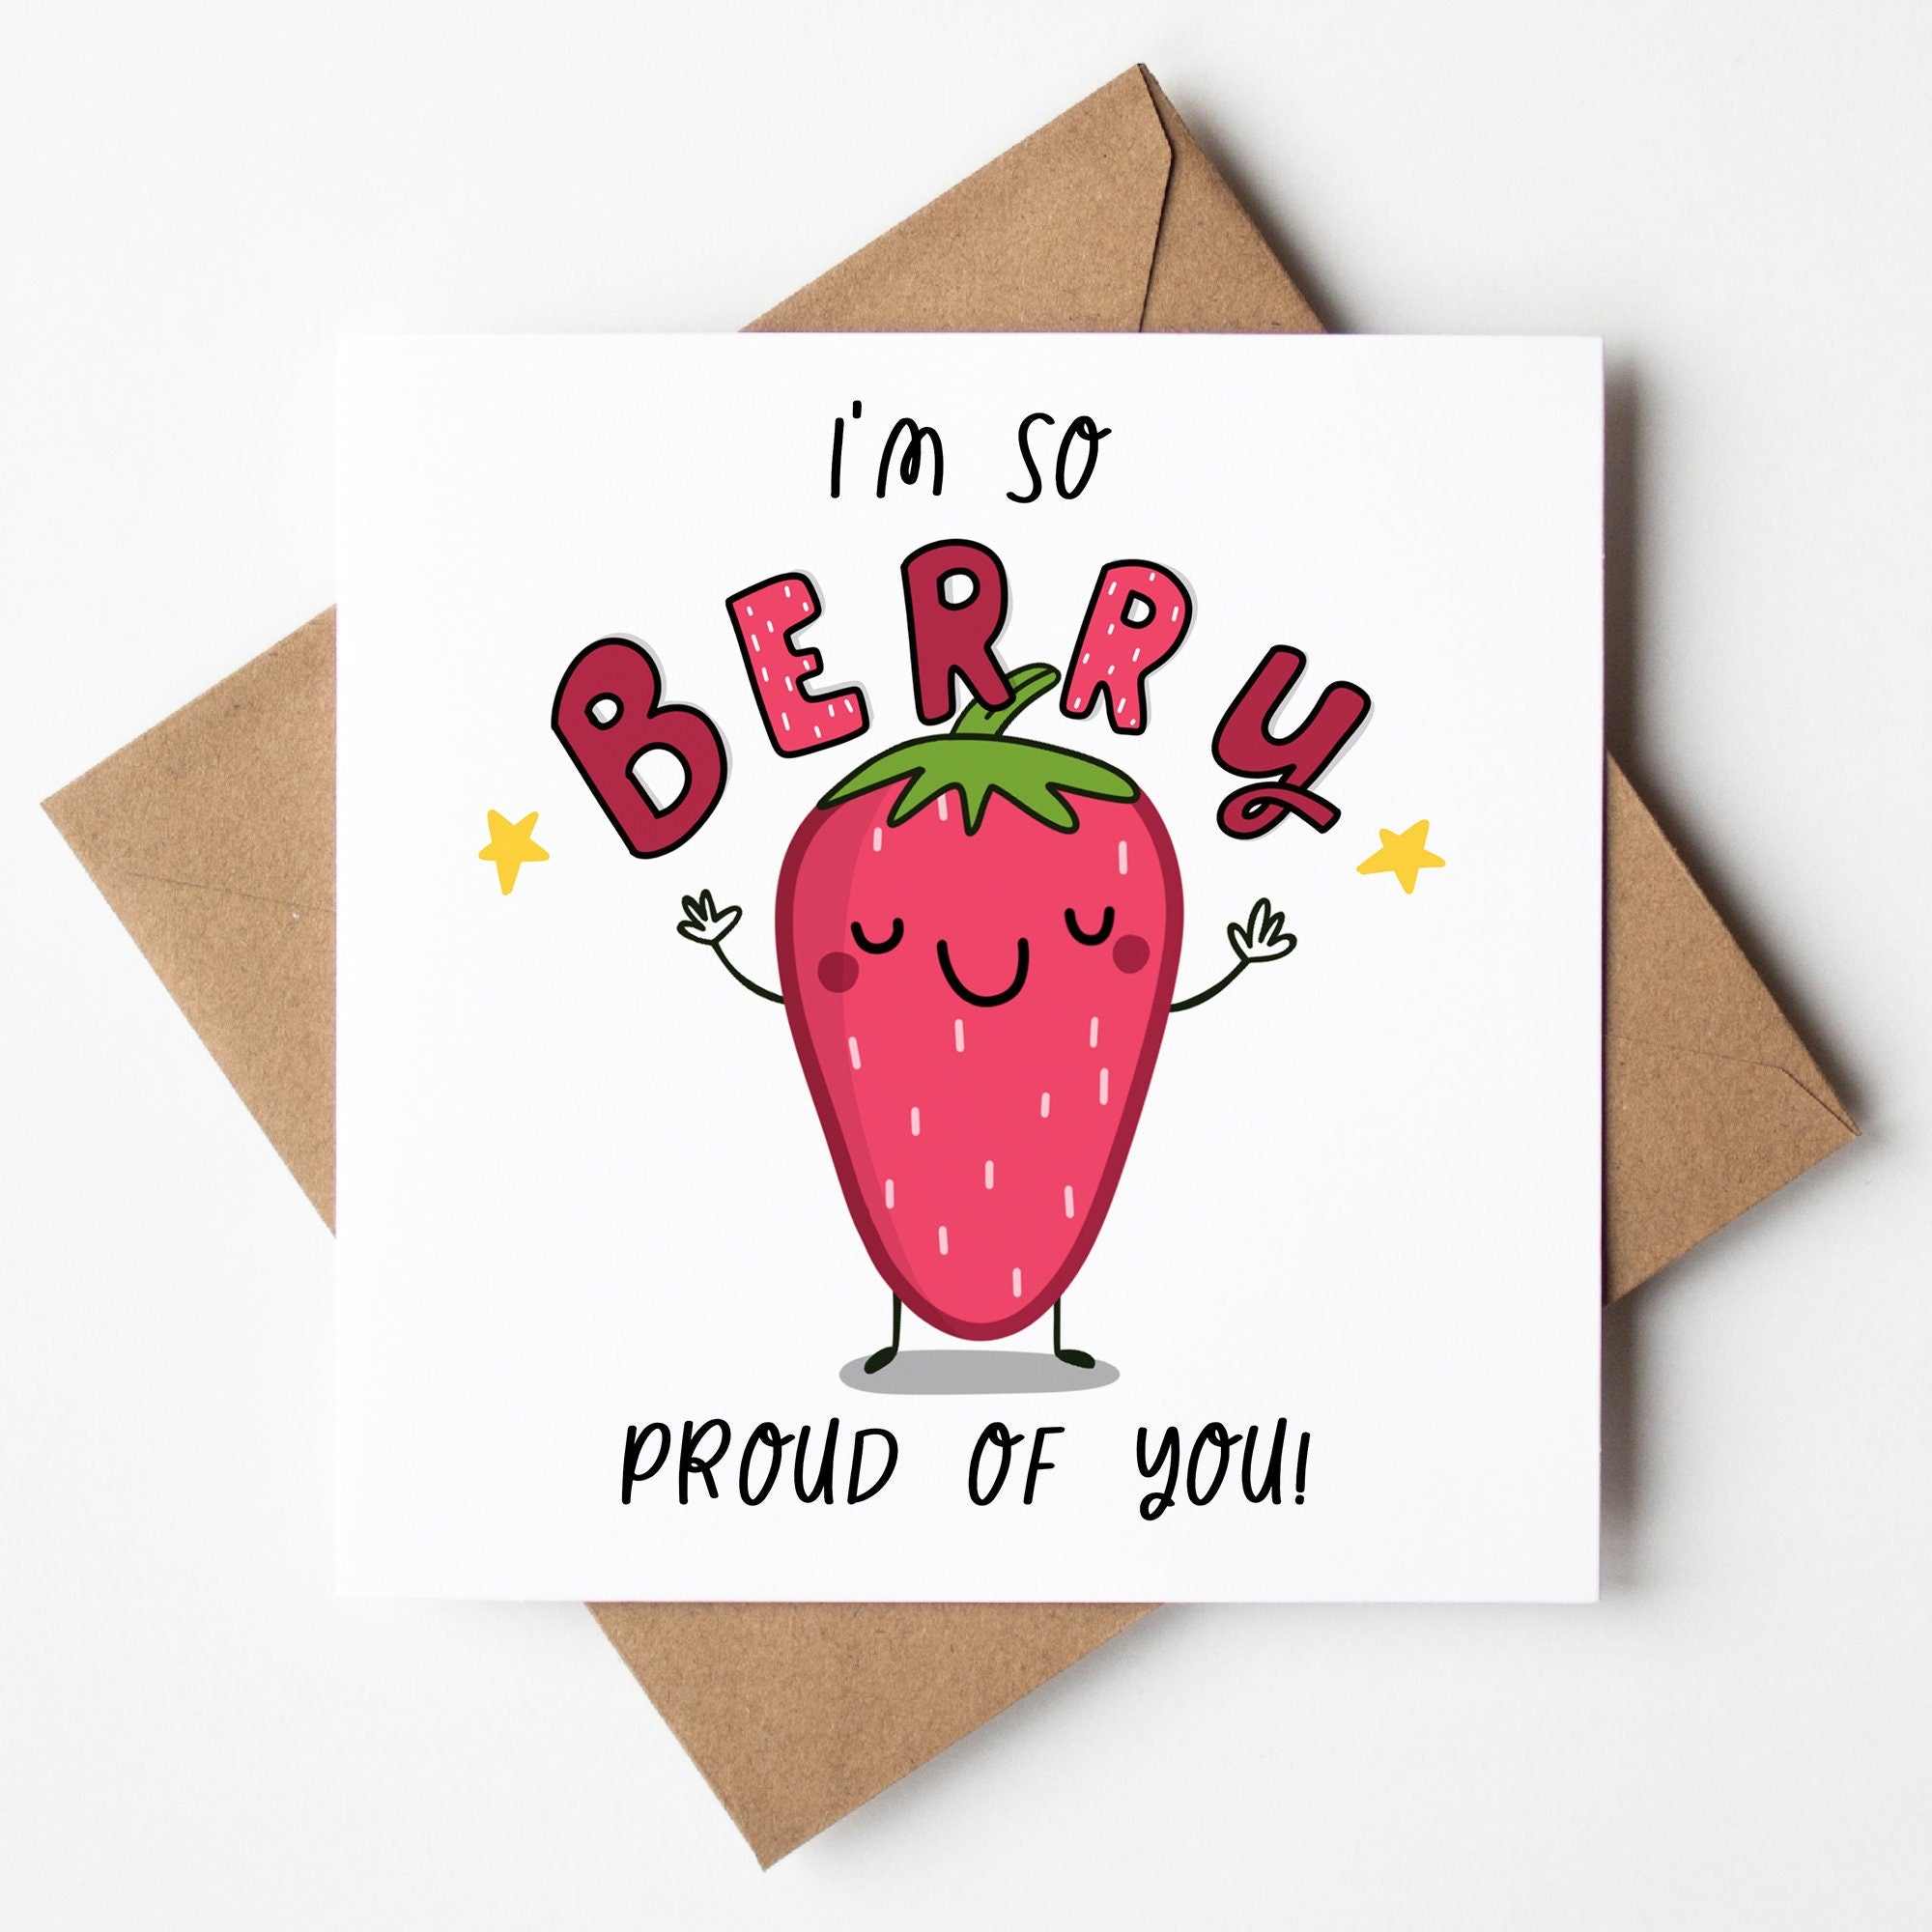 Proud Of You Card, New Job Card, Congratulations Card, Well Done Card, Passed Exams Card, Graduation, Encouragement, Support Card,